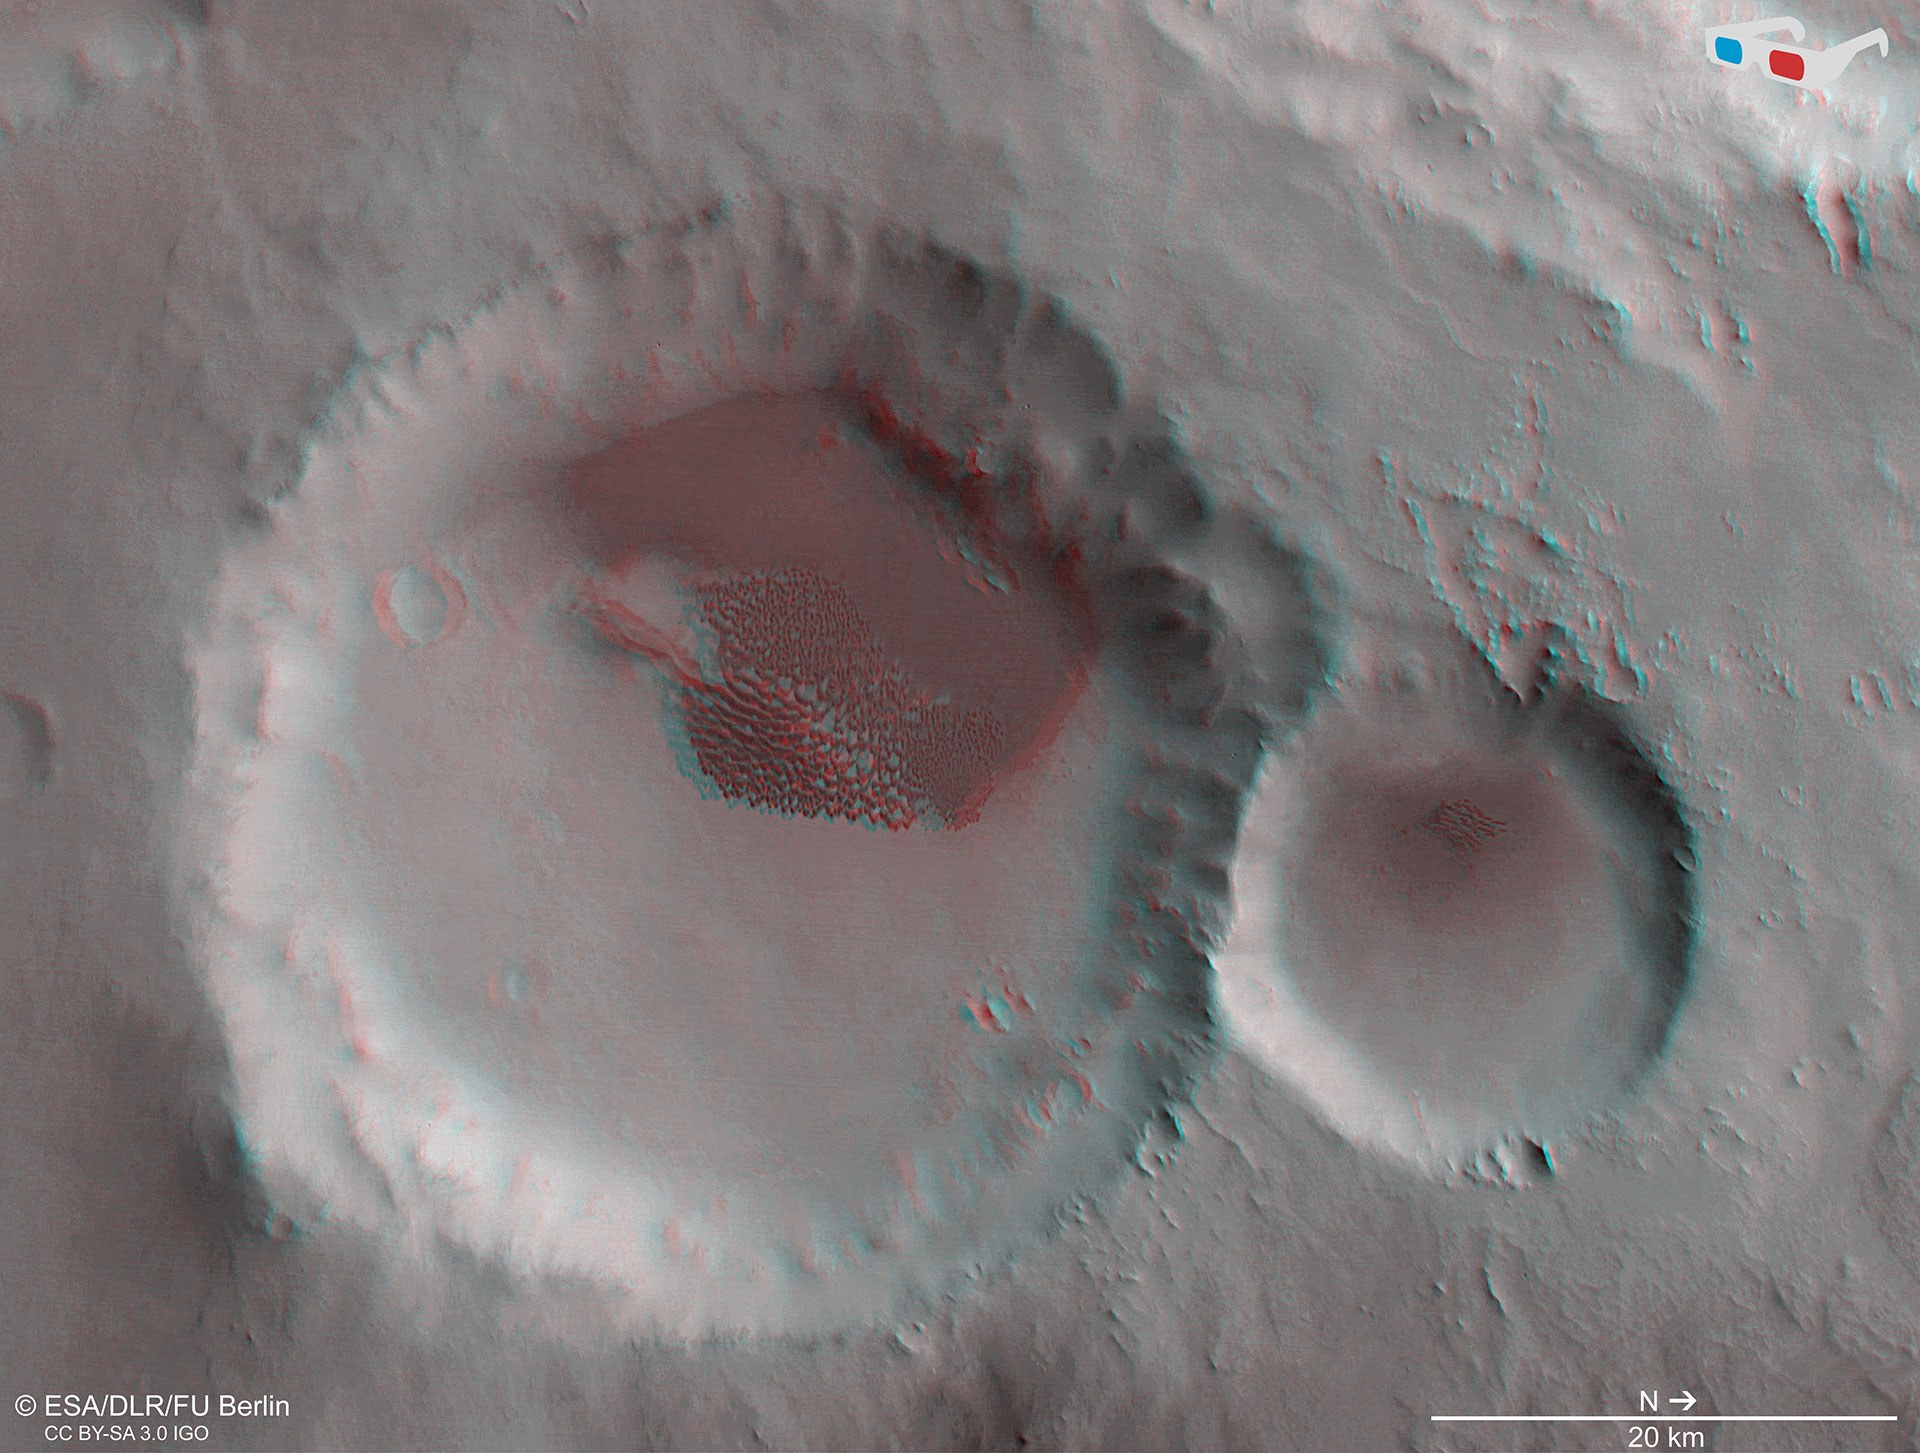 Anaglyph image of a crater and its large dune field in the Aonia Terra region